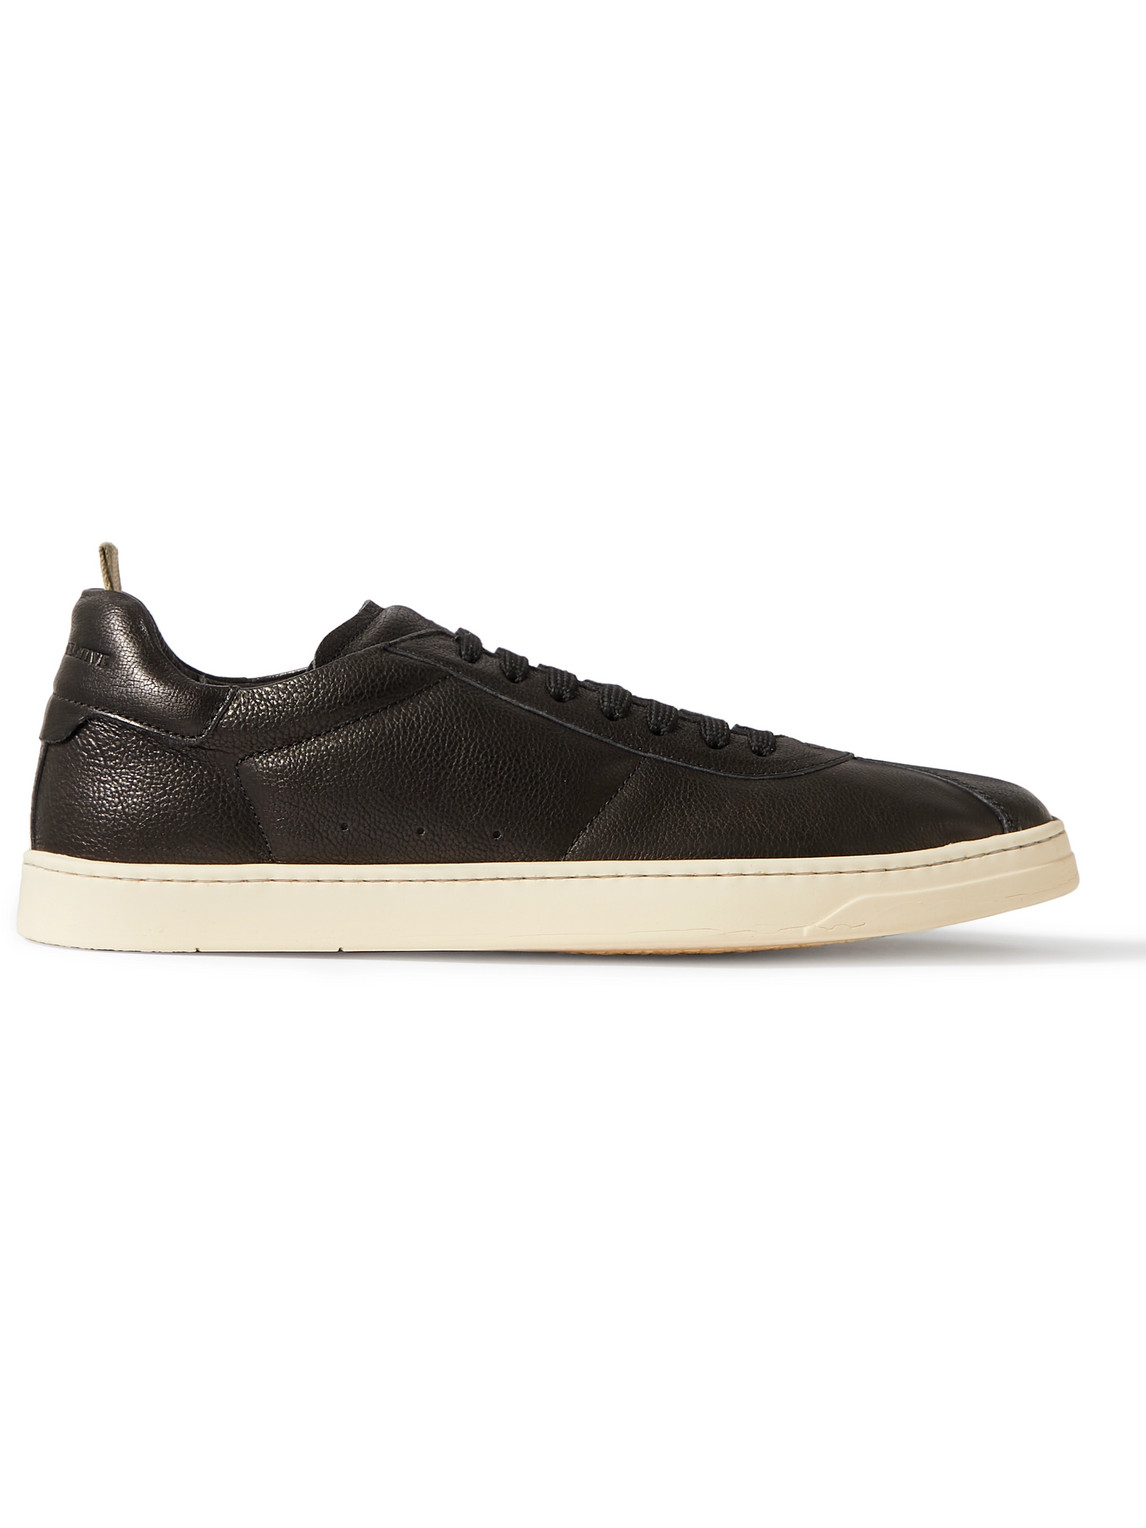 OFFICINE CREATIVE KARMA PANELLED LEATHER SNEAKERS